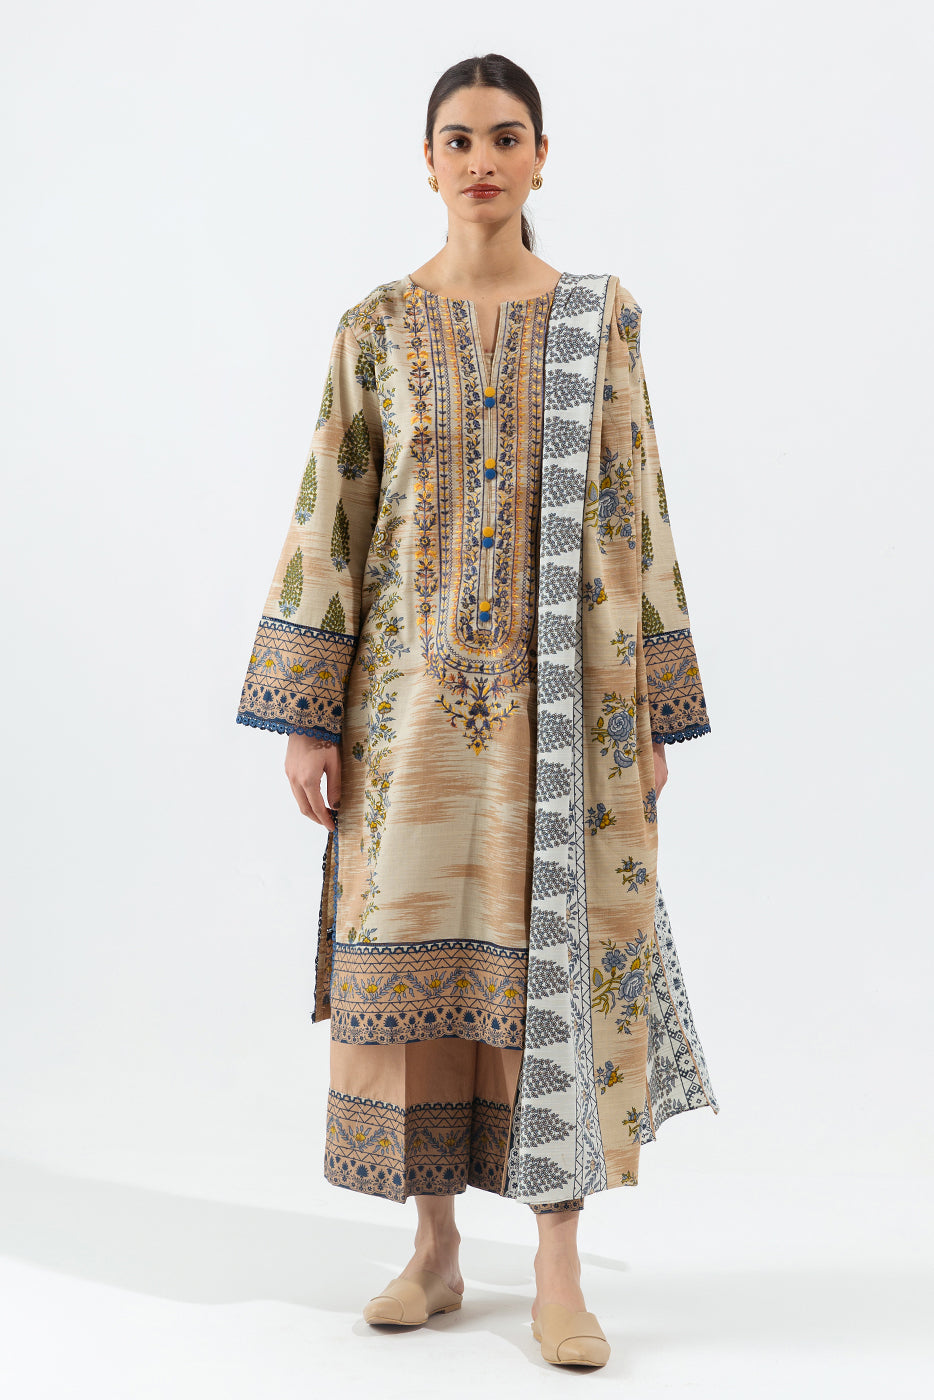 3 PIECE - EMBROIDERED KHADDAR SUIT - TAUPE TAN